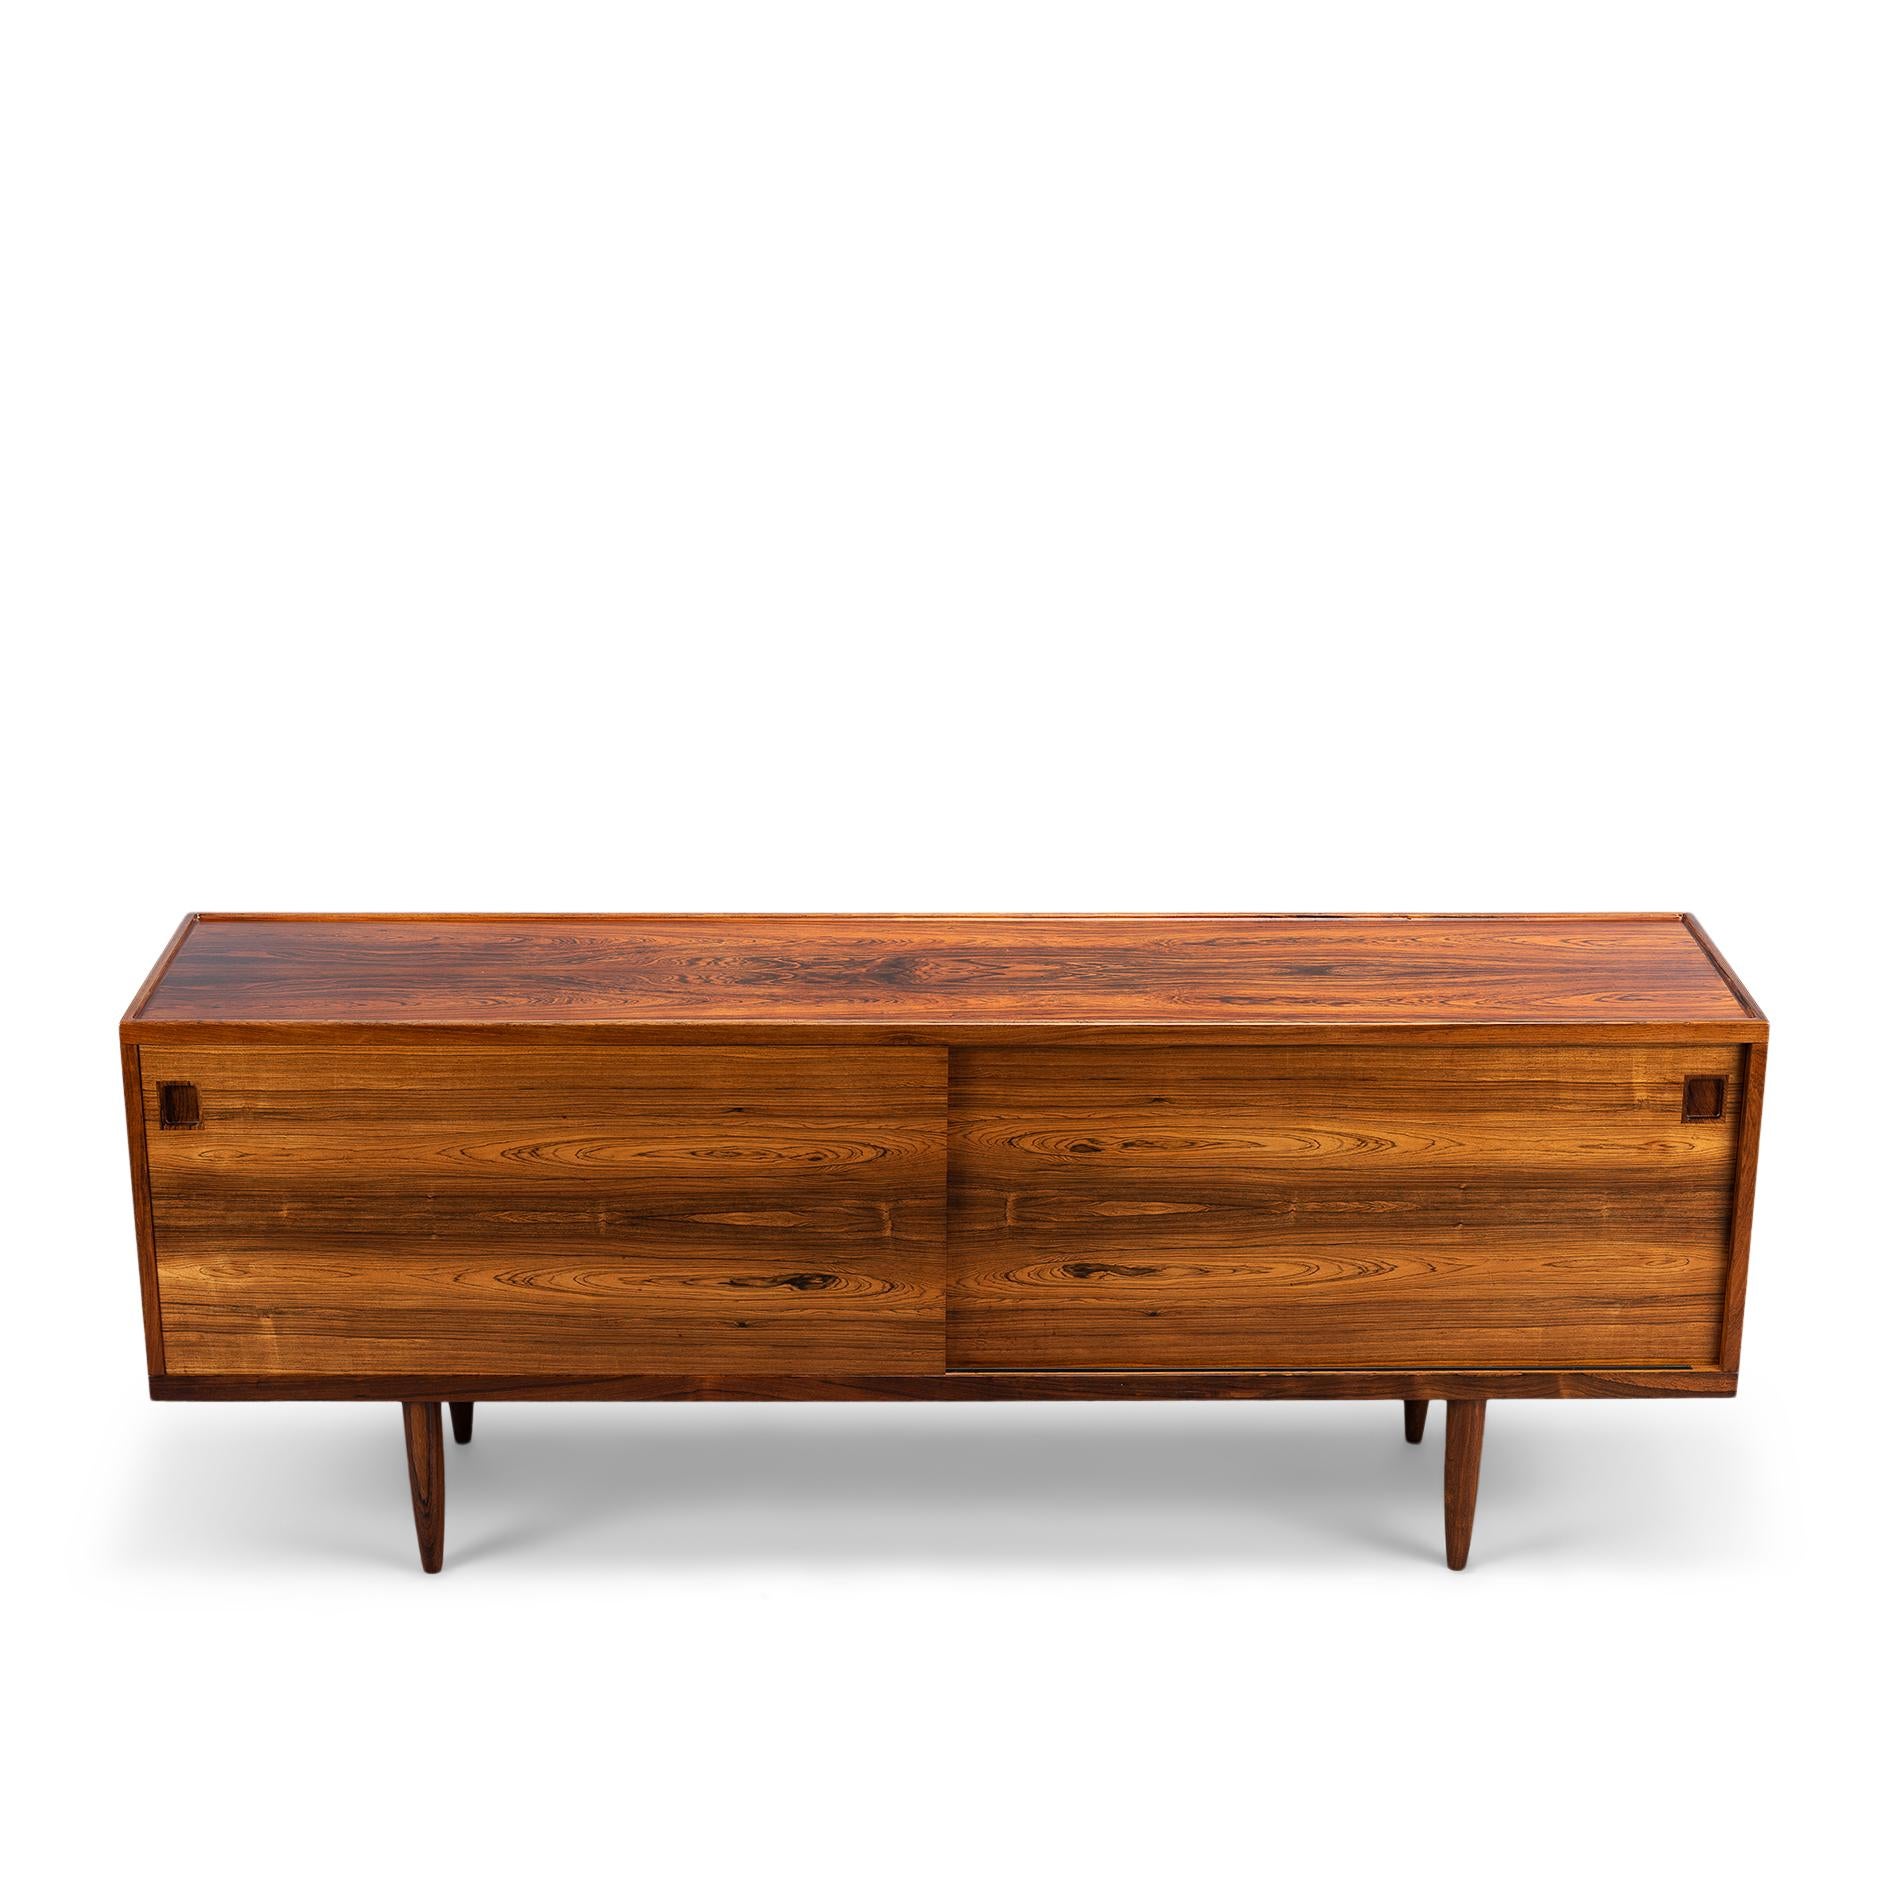 Mid-20th Century Model No. 20 Rosewood Sideboard by Niels O. Moller for J.L Møllers, 1950s